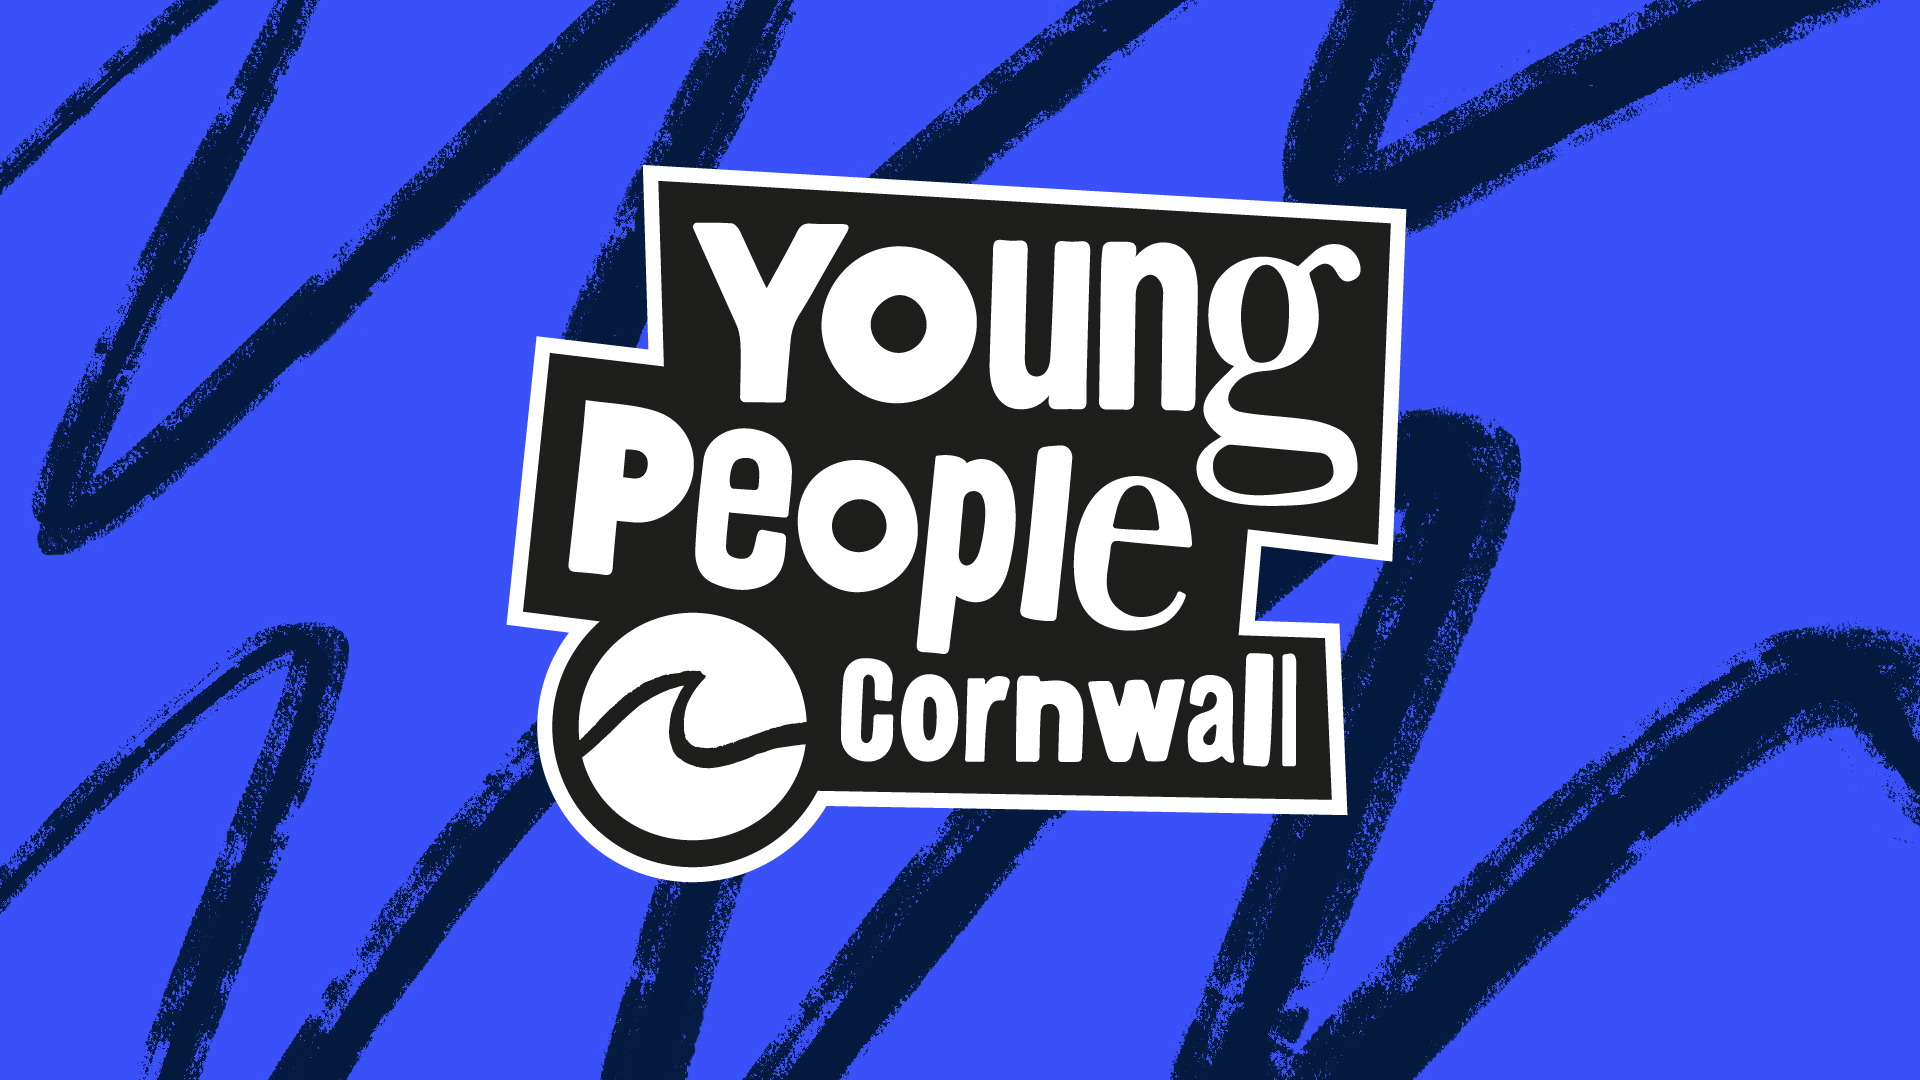 Working With Students at Falmouth University, Kingdom & Sparrow Evolved the Identity for Young People Cornwall